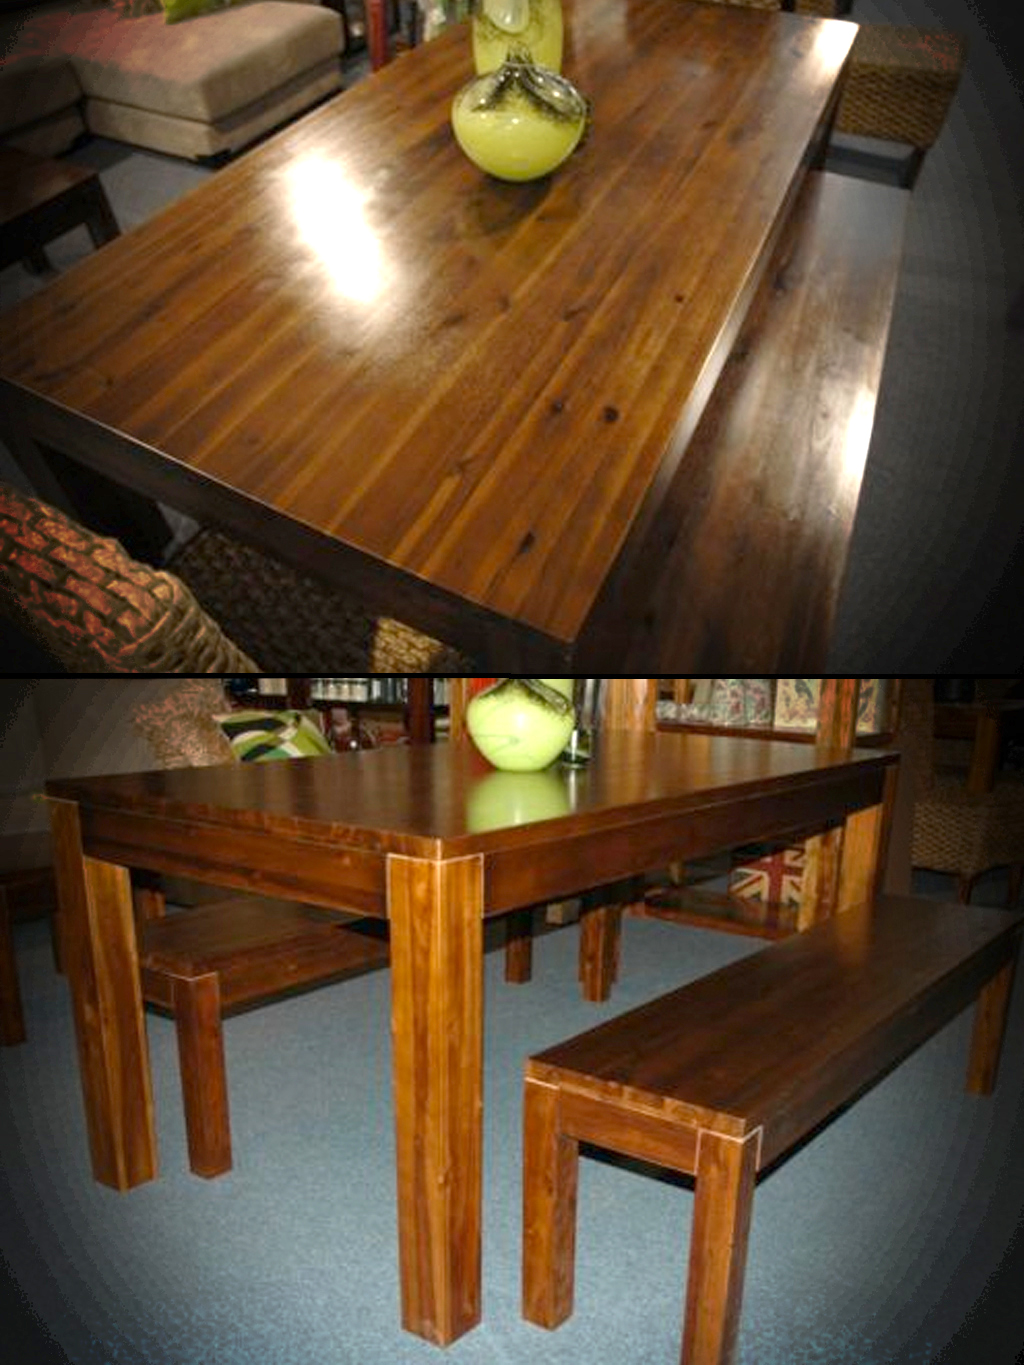 Solid Blackwood dining table (1.8m) & 2 benches.